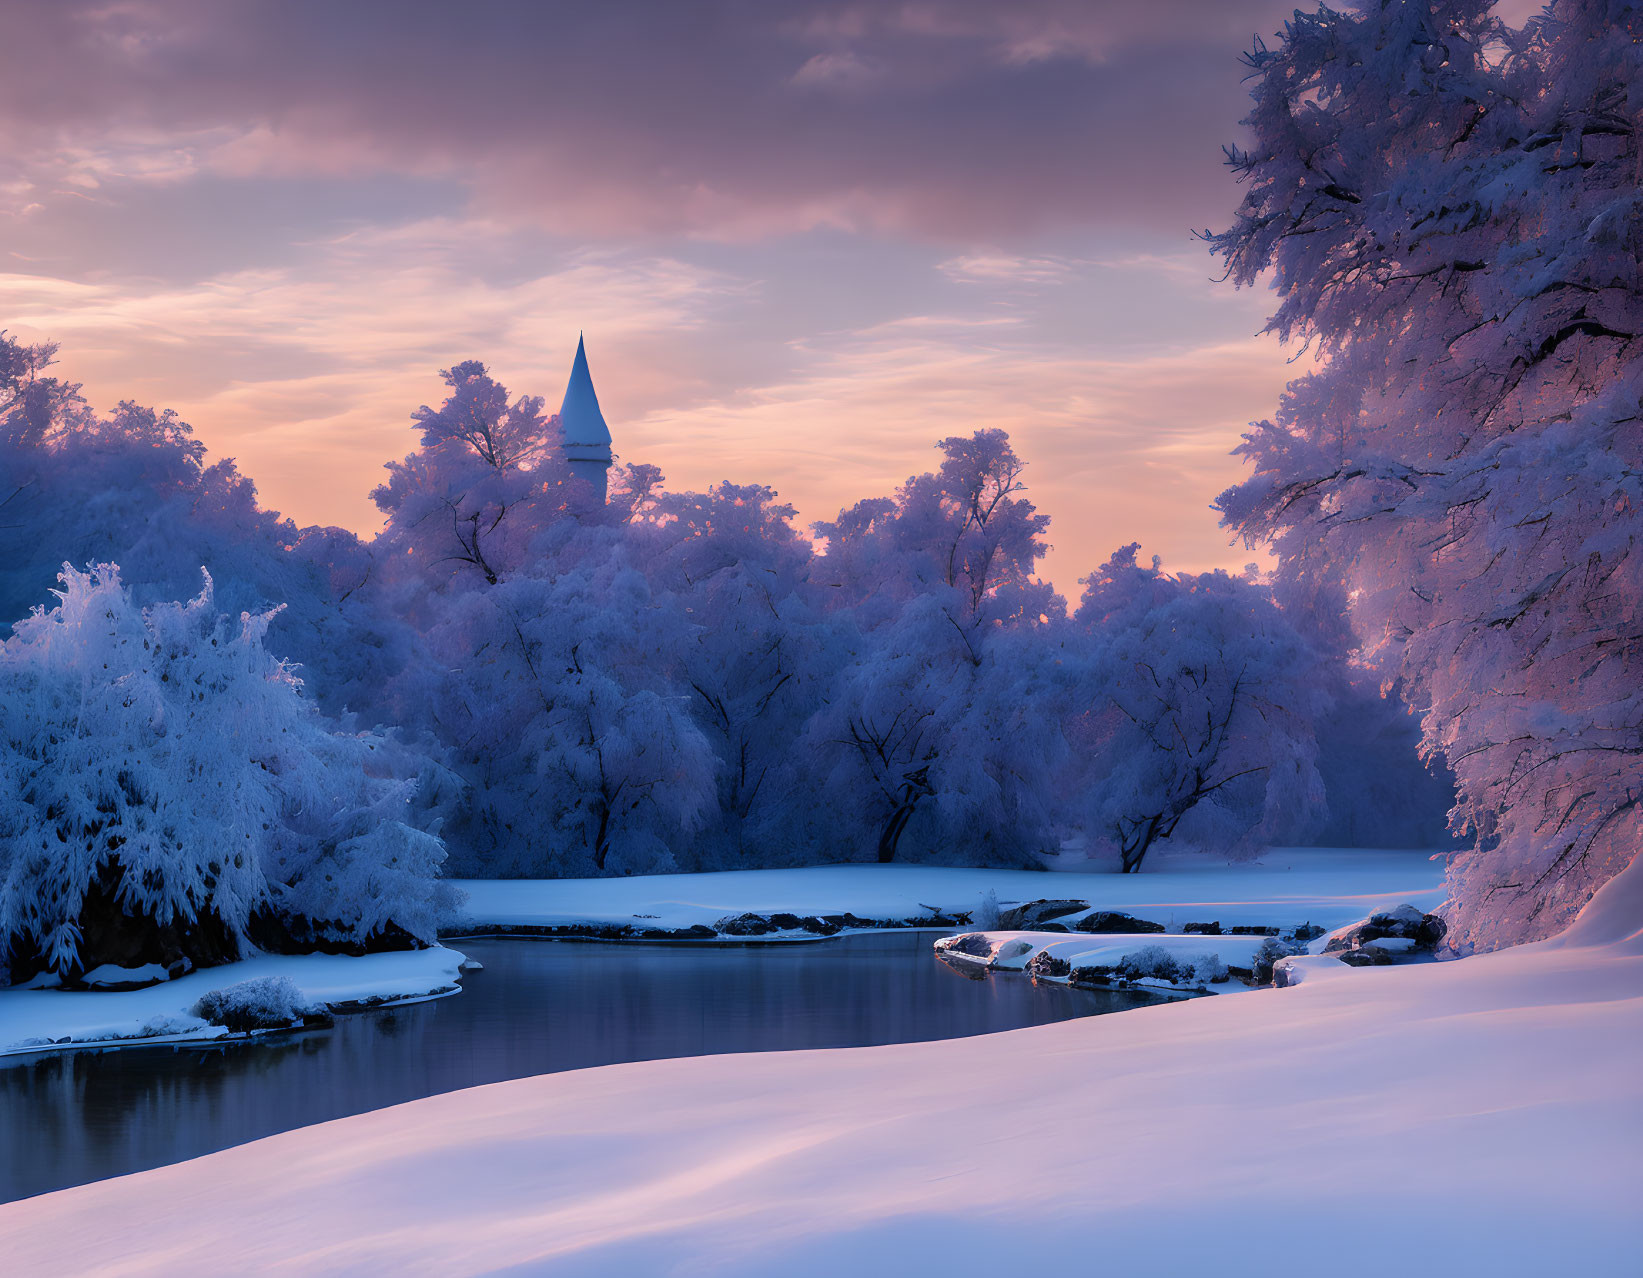 Snowy Dusk Landscape with Frosted Trees and Church Spire